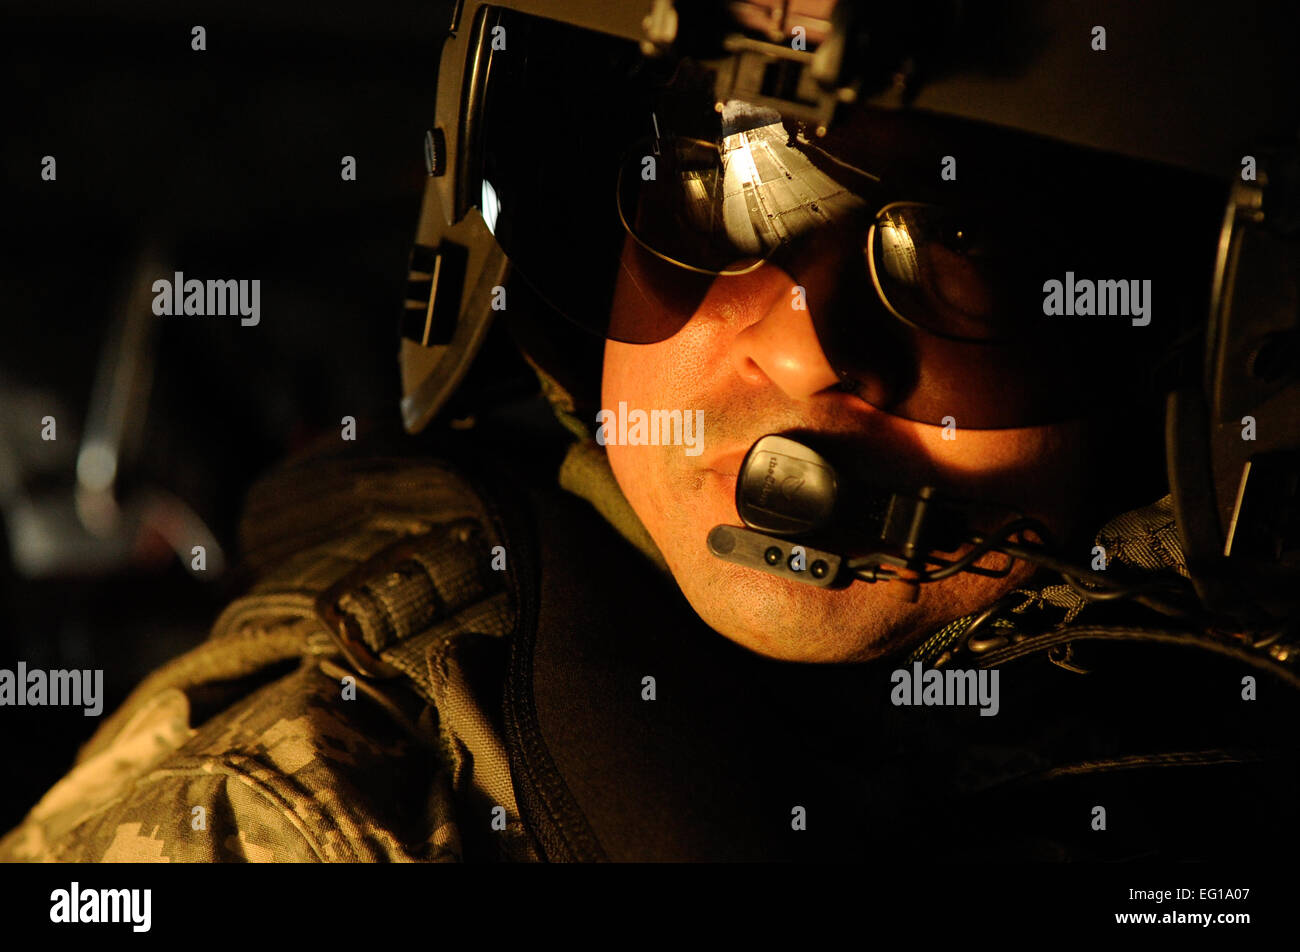 A U.S. Army CH-47 Chinook flight engineer assigned to the 160th Special Operations Aviation Regiment, looks out the open ramp of a CH-47 helicopter while in flight, March 1, 2011 over the Gulf of Mexico in support of Emerald Warrior 2011. Emerald Warrior 2011 is a U.S. Special Operations Command-sponsored, multiservice exercise designed to leverage lessons learned from Operations Iraqi Freedom and Enduring Freedom to provide trained and ready forces to combatant commanders.  Tech Sgt. Manuel J. MartinezReleased Stock Photo